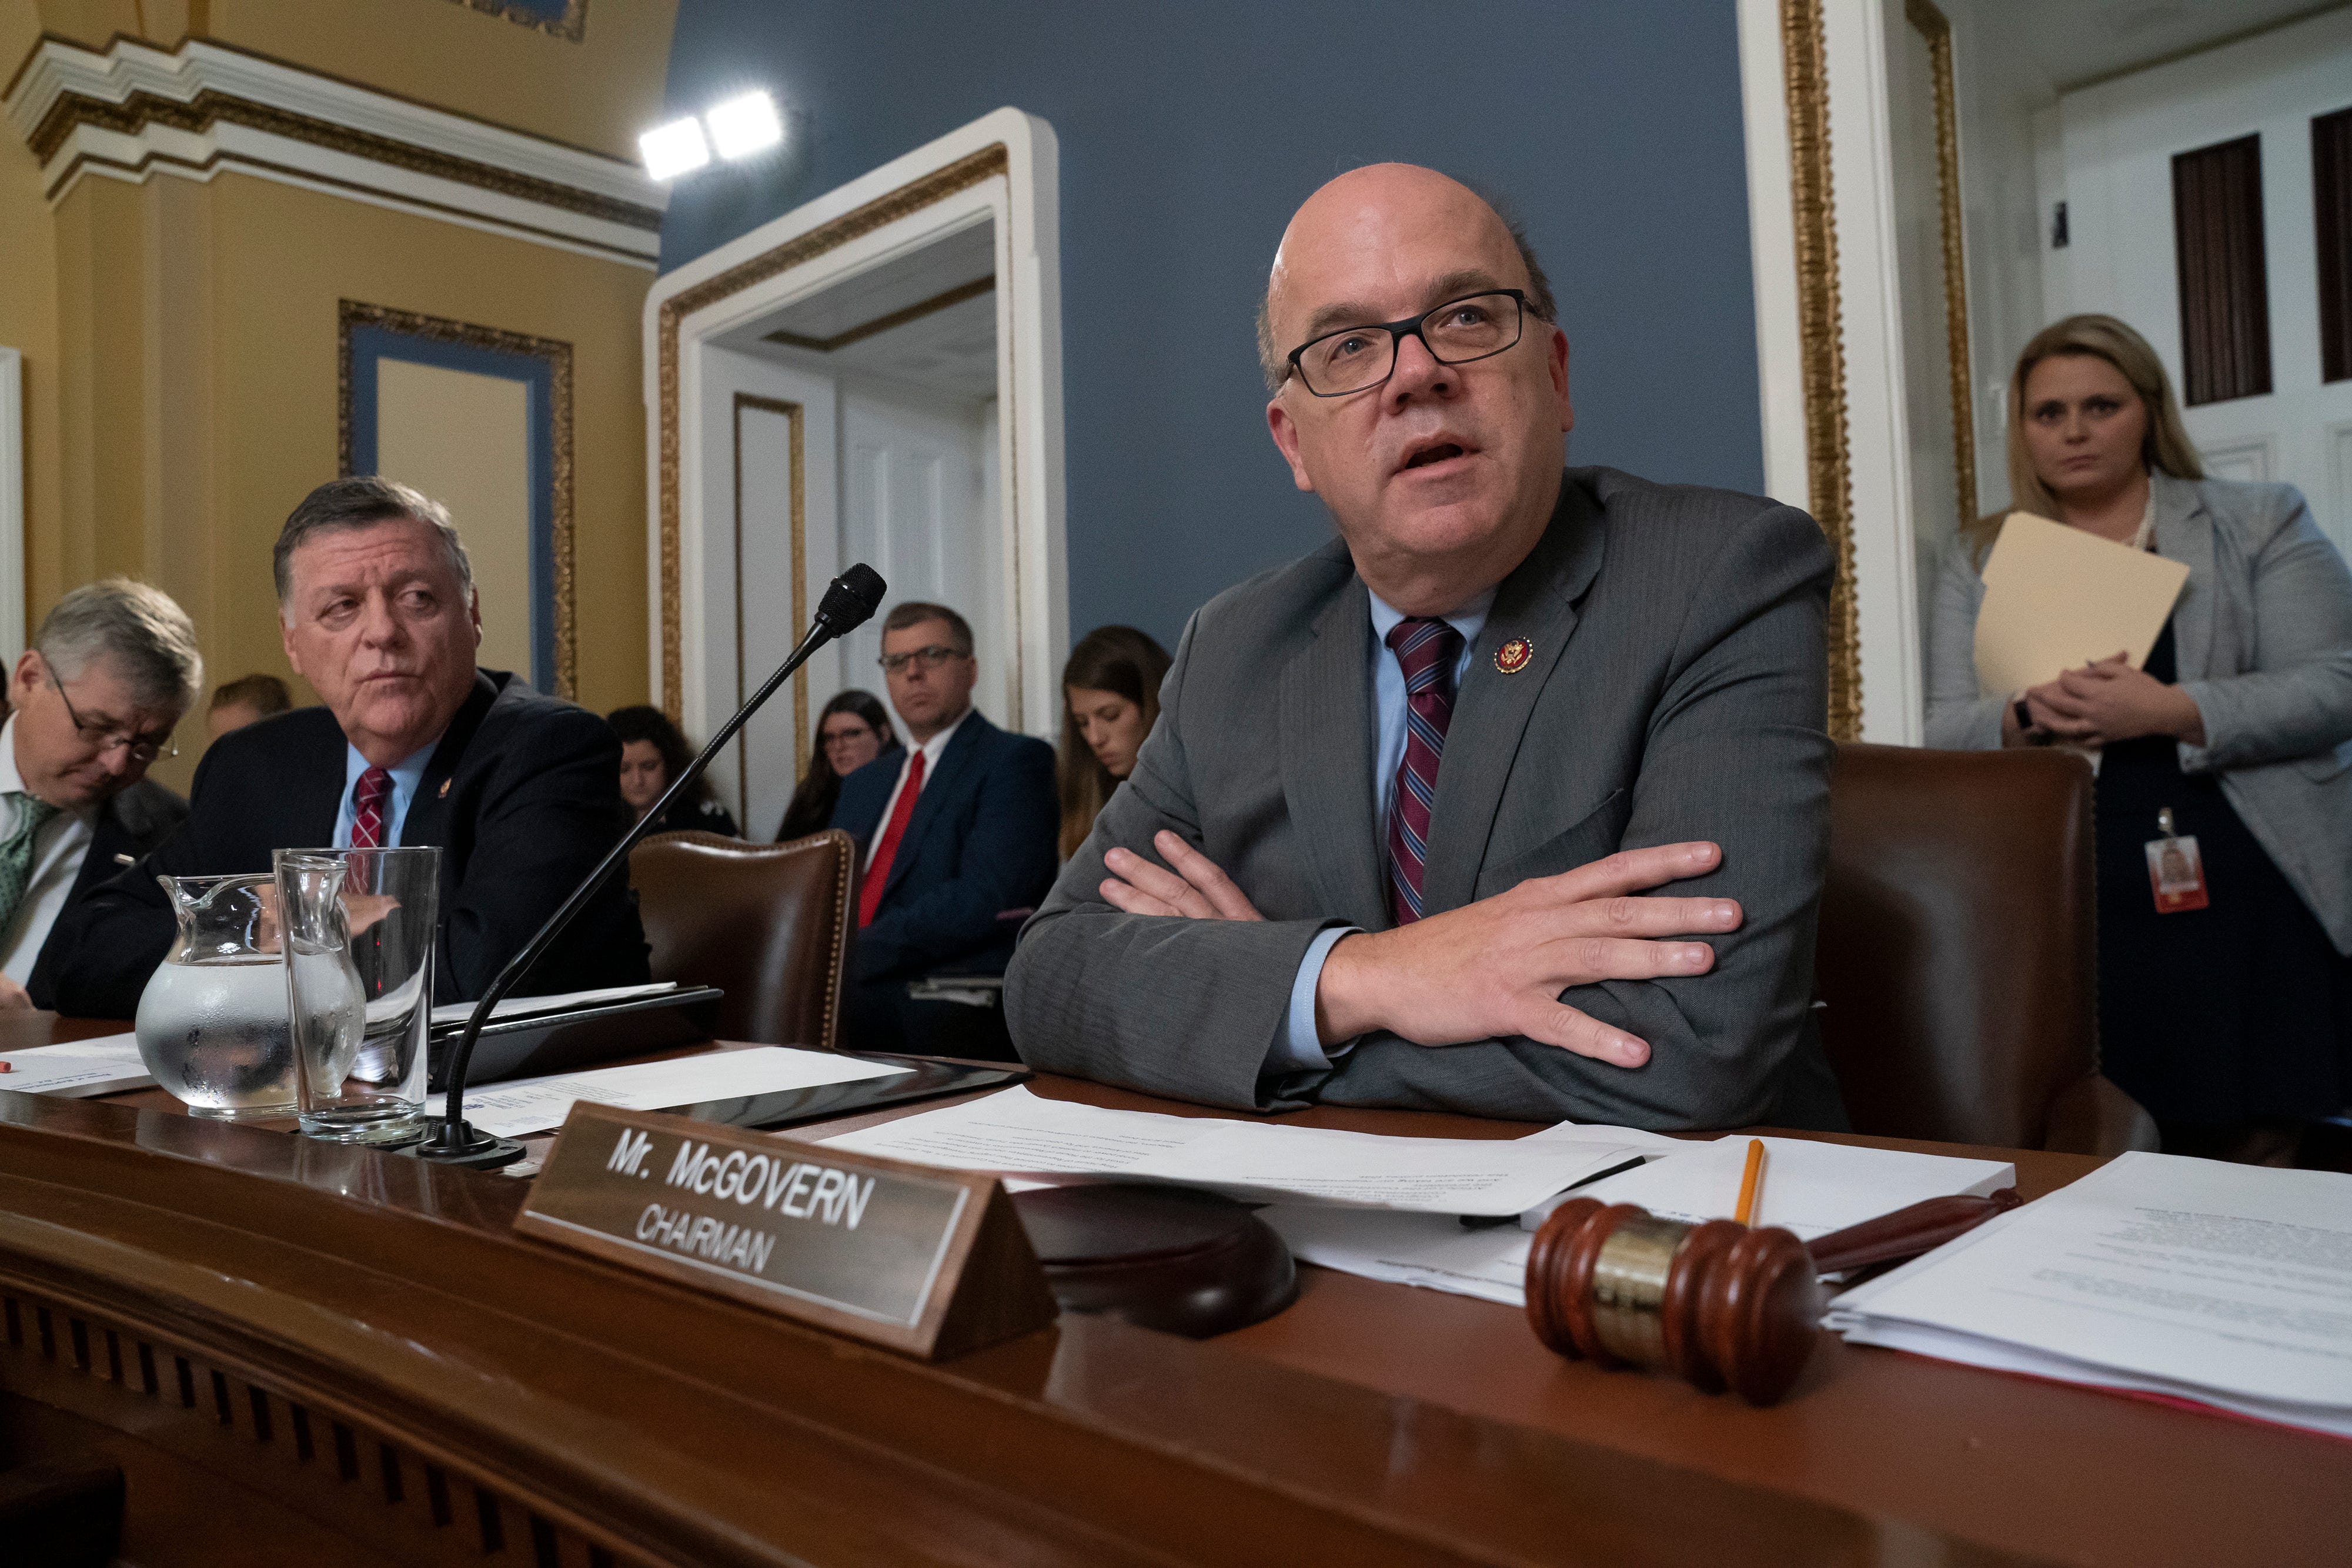 House Rules Committee Chairman Jim McGovern, D-Mass., during a congressional hearing in October 2019. McGovern said a constituent told him the Jan. 6 riot at the U.S. Capitol was made up.